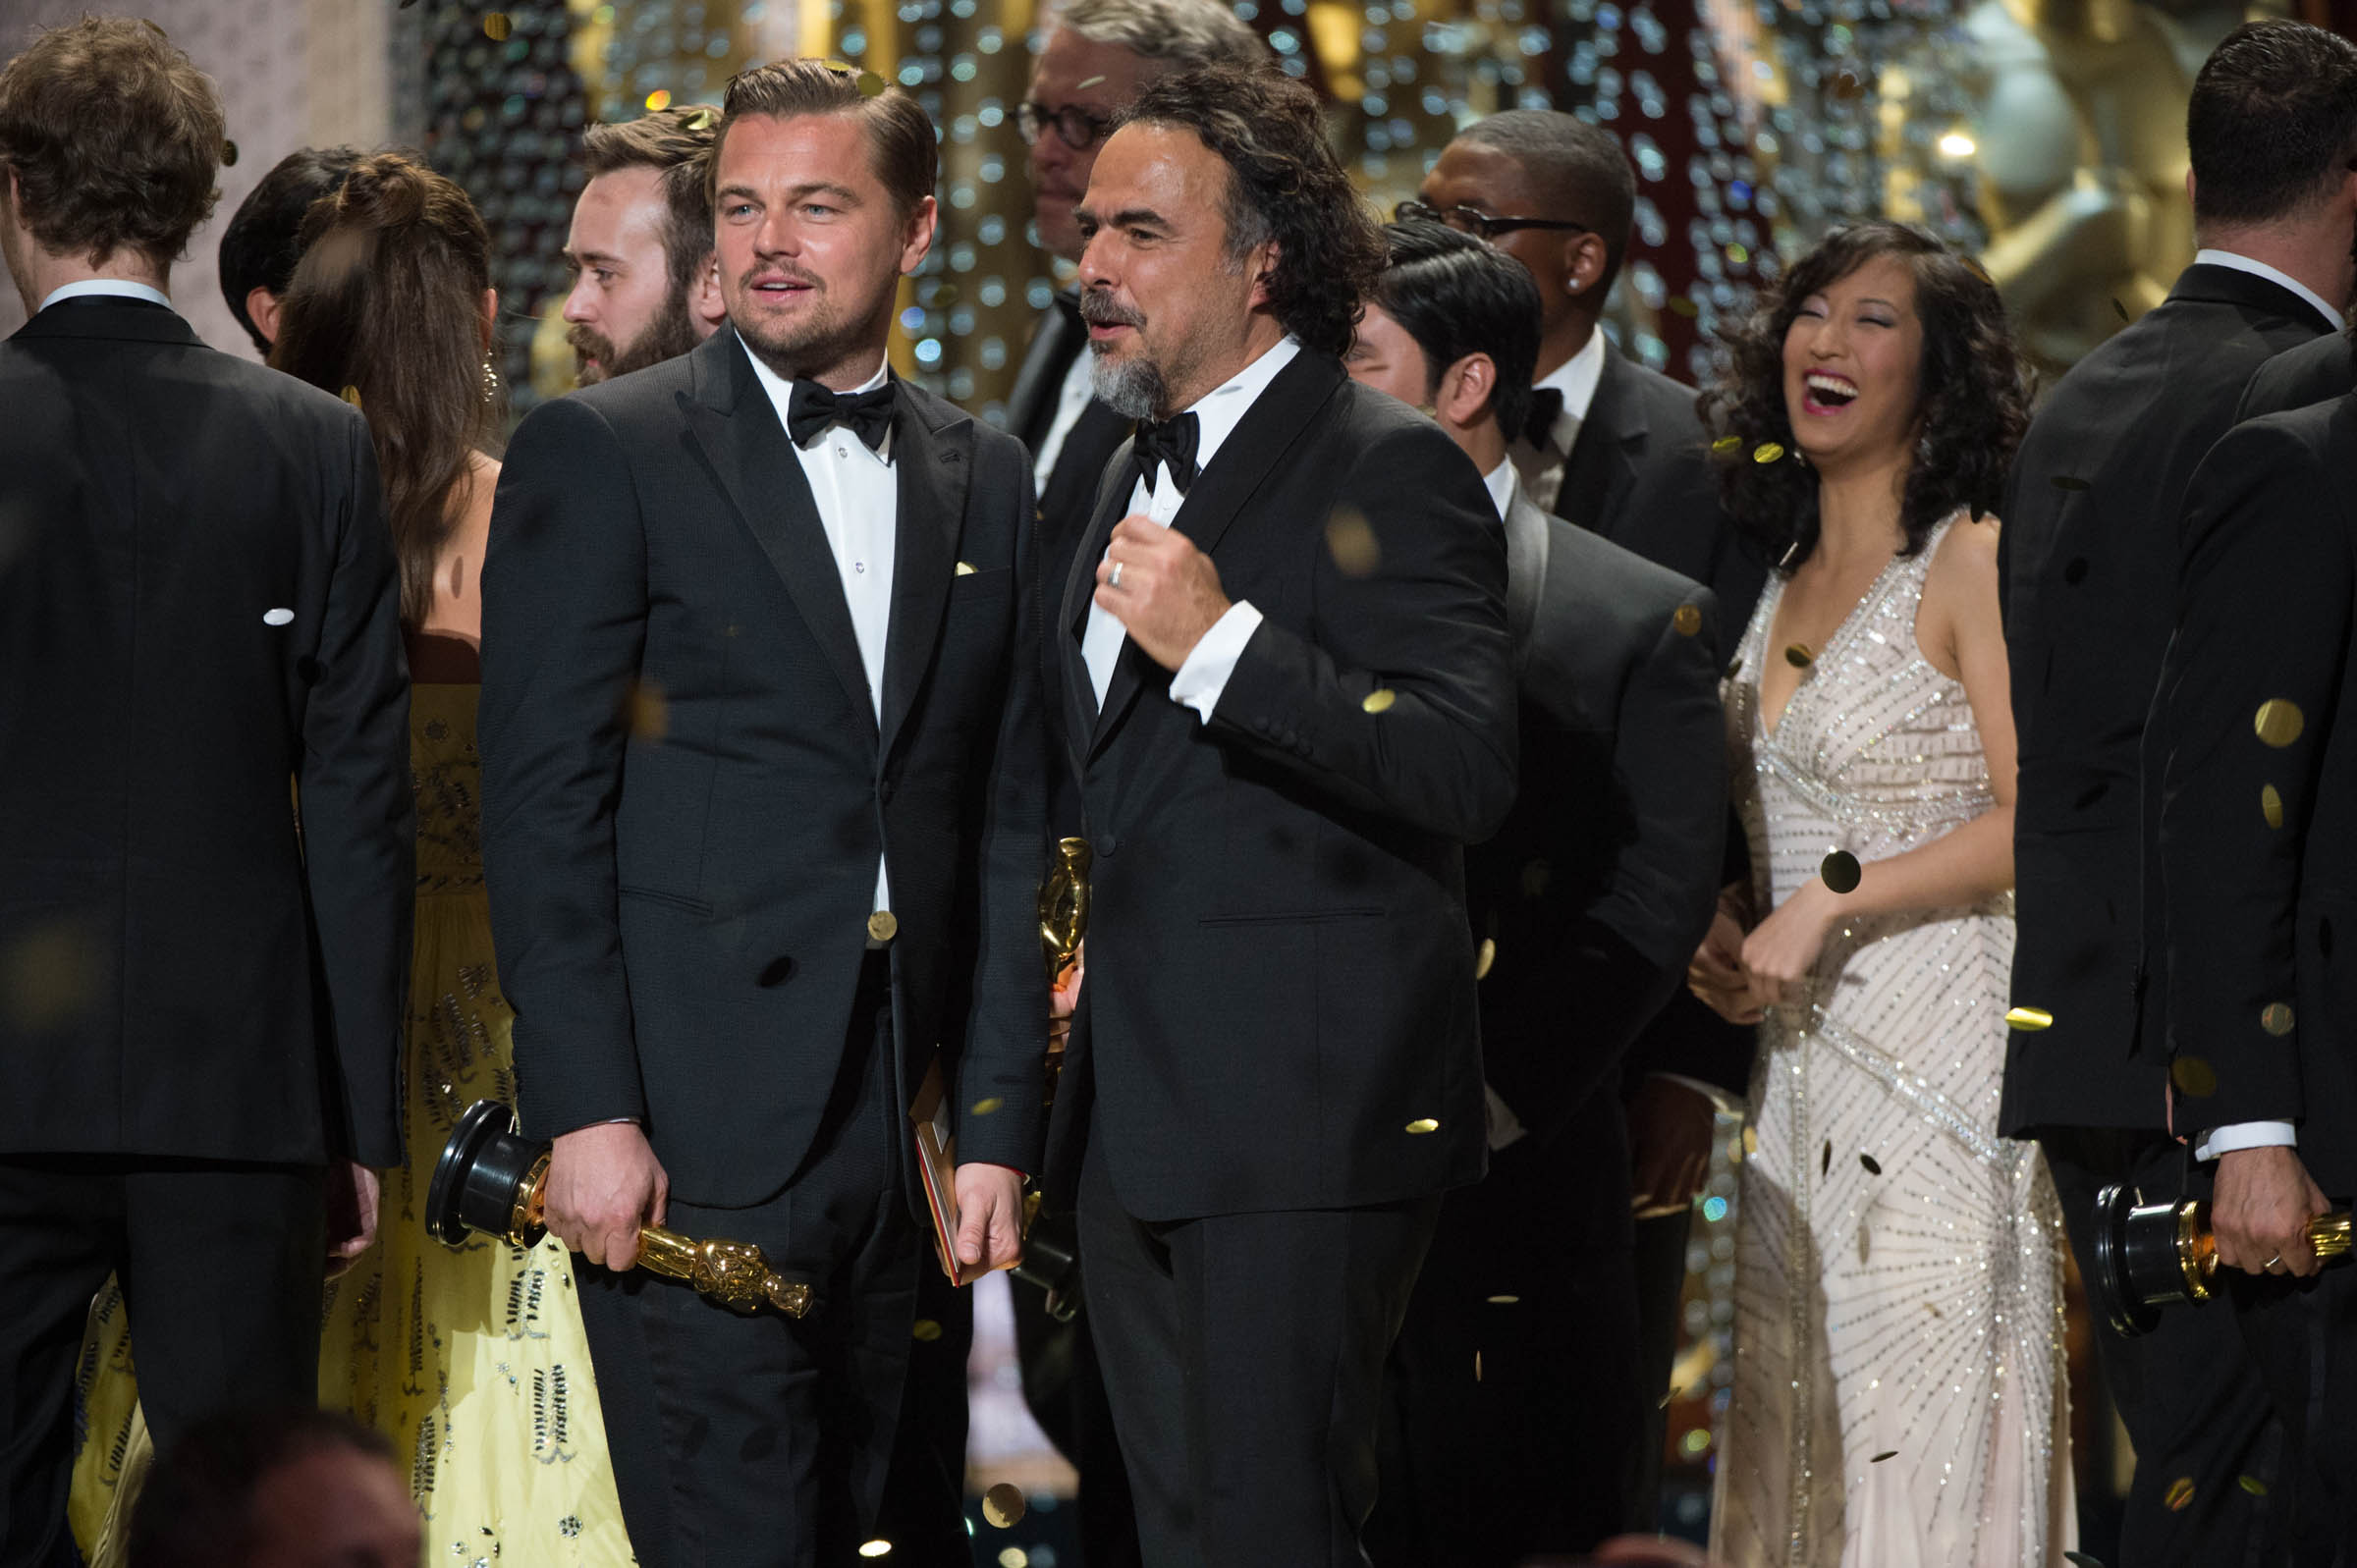 Leonardo DiCaprio, Oscar®-winner for Performance by an actor in a Leading role, for work on “The Revenant” and  Alejandro G. Iñárritu, Oscar®-winner for Achievement in directing, for work on “The Revenant” celebrate onstage during the live ABC Telecast of The 88th Oscars® at the Dolby® Theatre in Hollywood, CA on Sunday, February 28, 2016. Photo Credit: Aaron Poole / ©A.M.P.A.S.